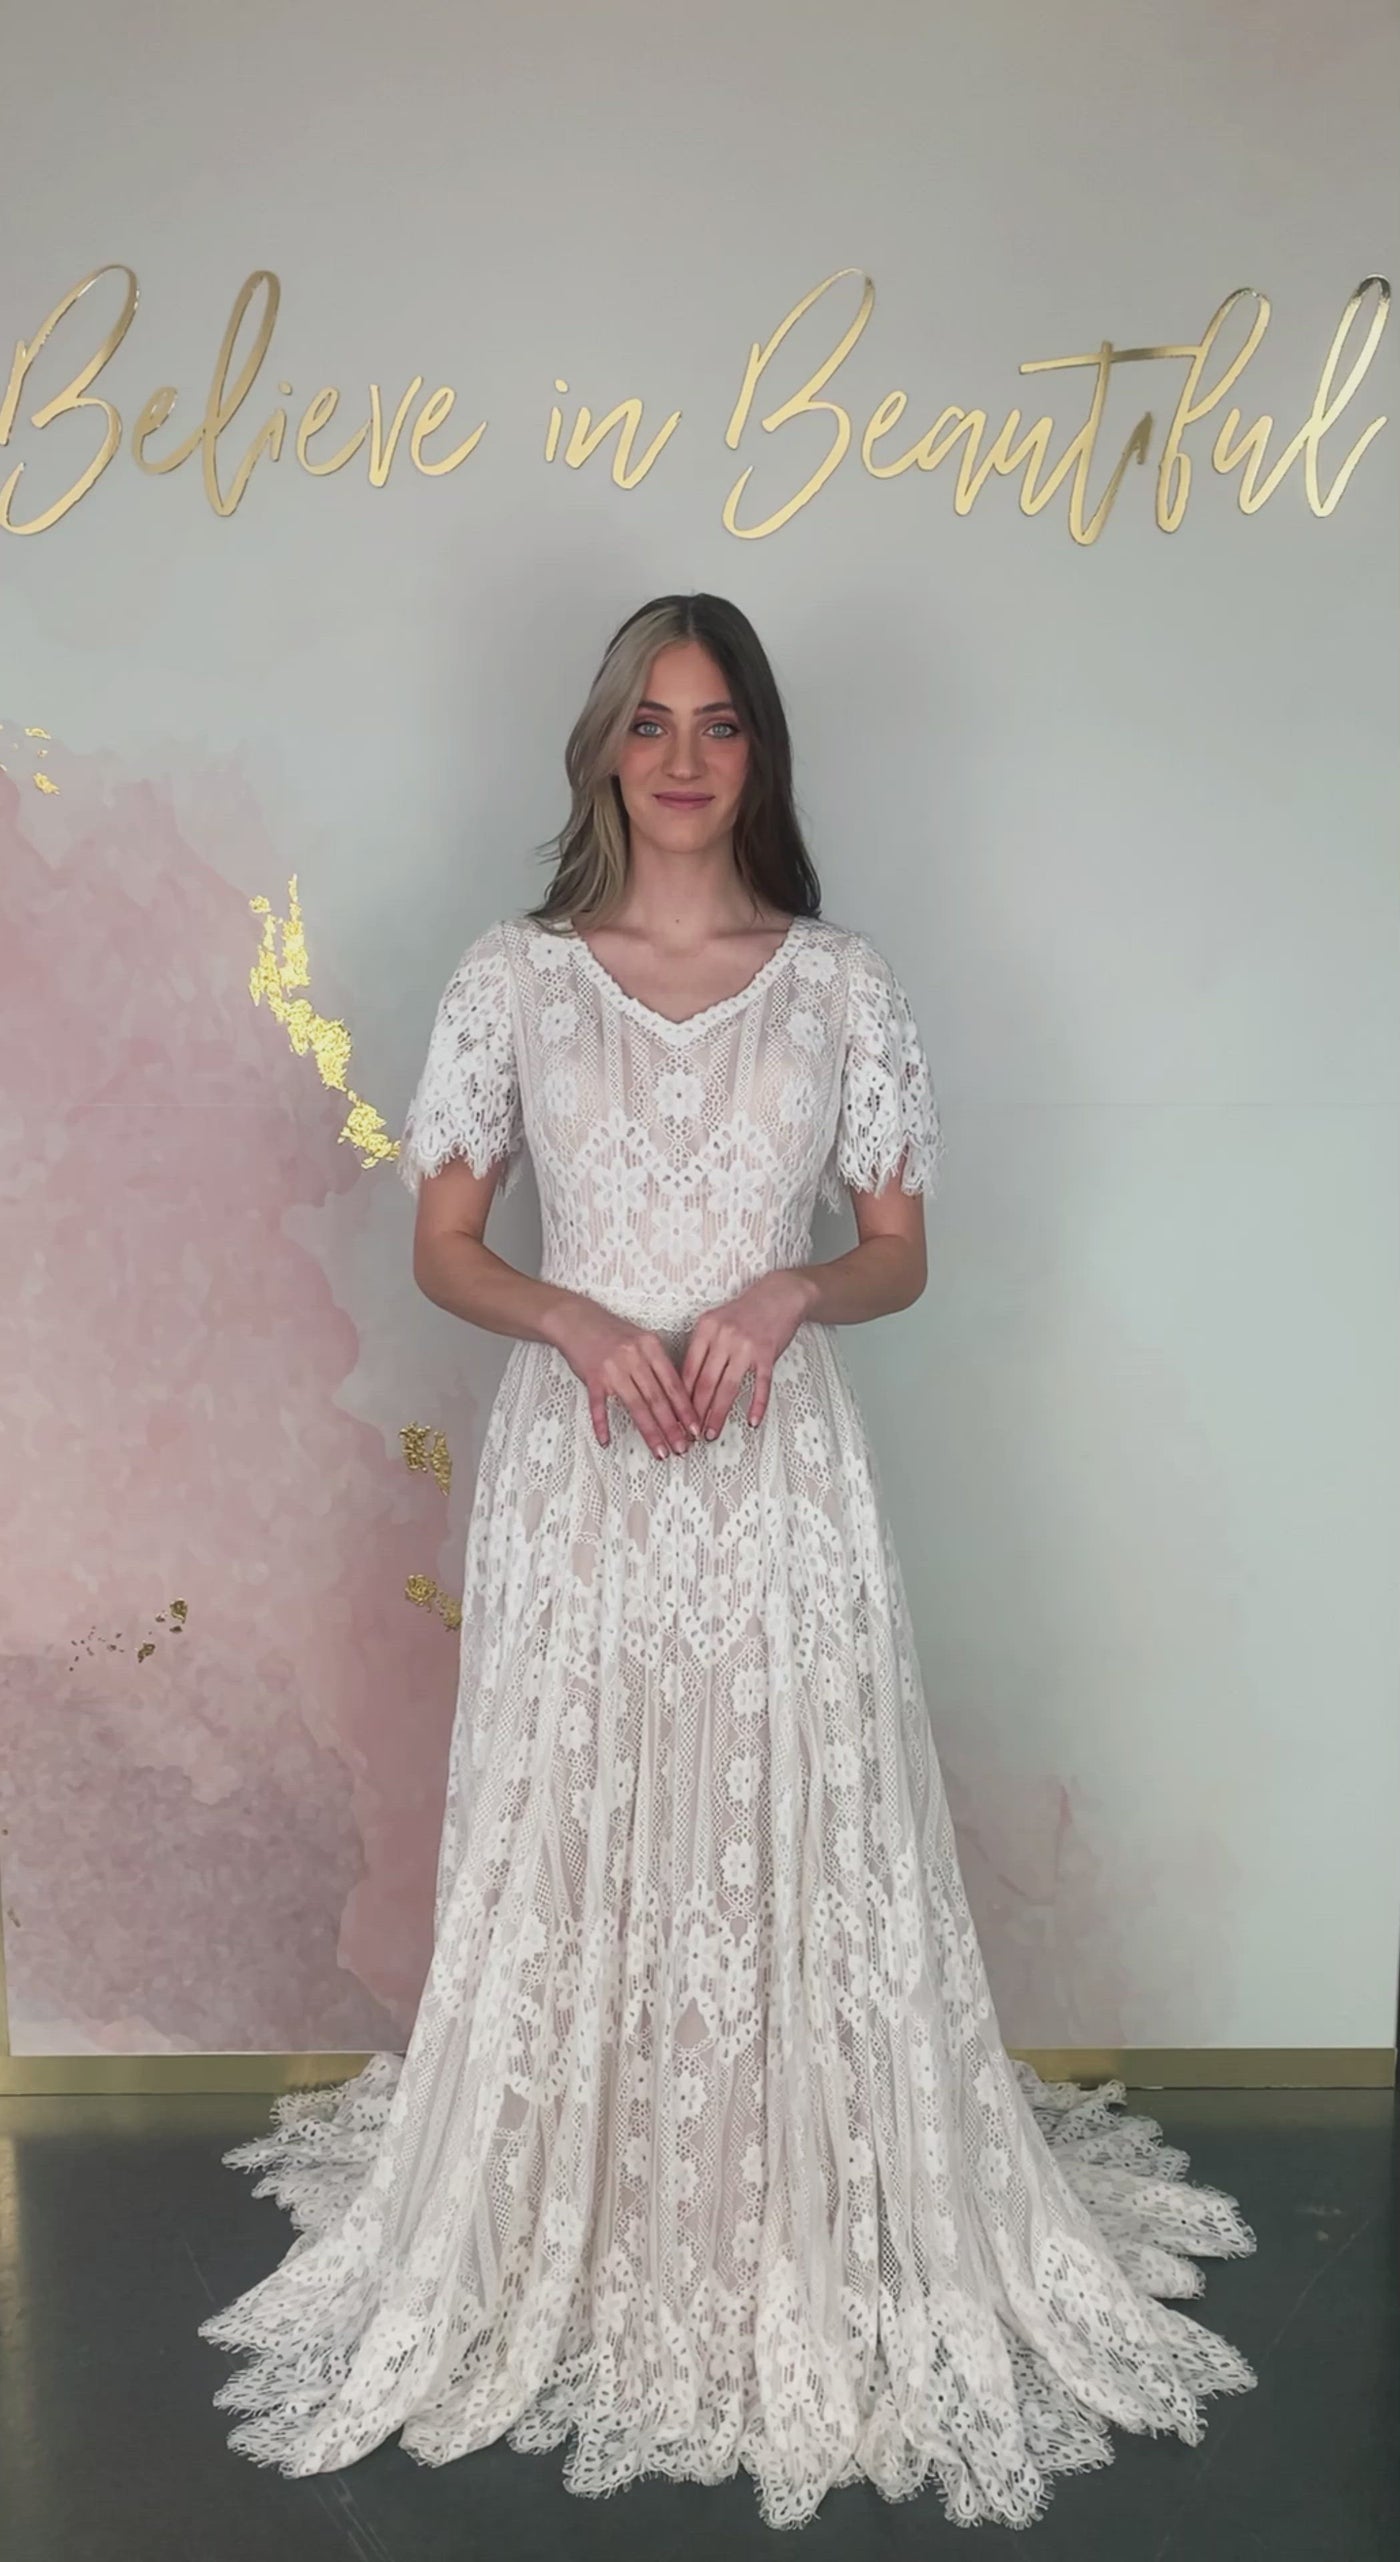 A video featuring our Calabria wedding dress and its lace flutter sleeves, full A-line lace fit, and floral lace pattern.